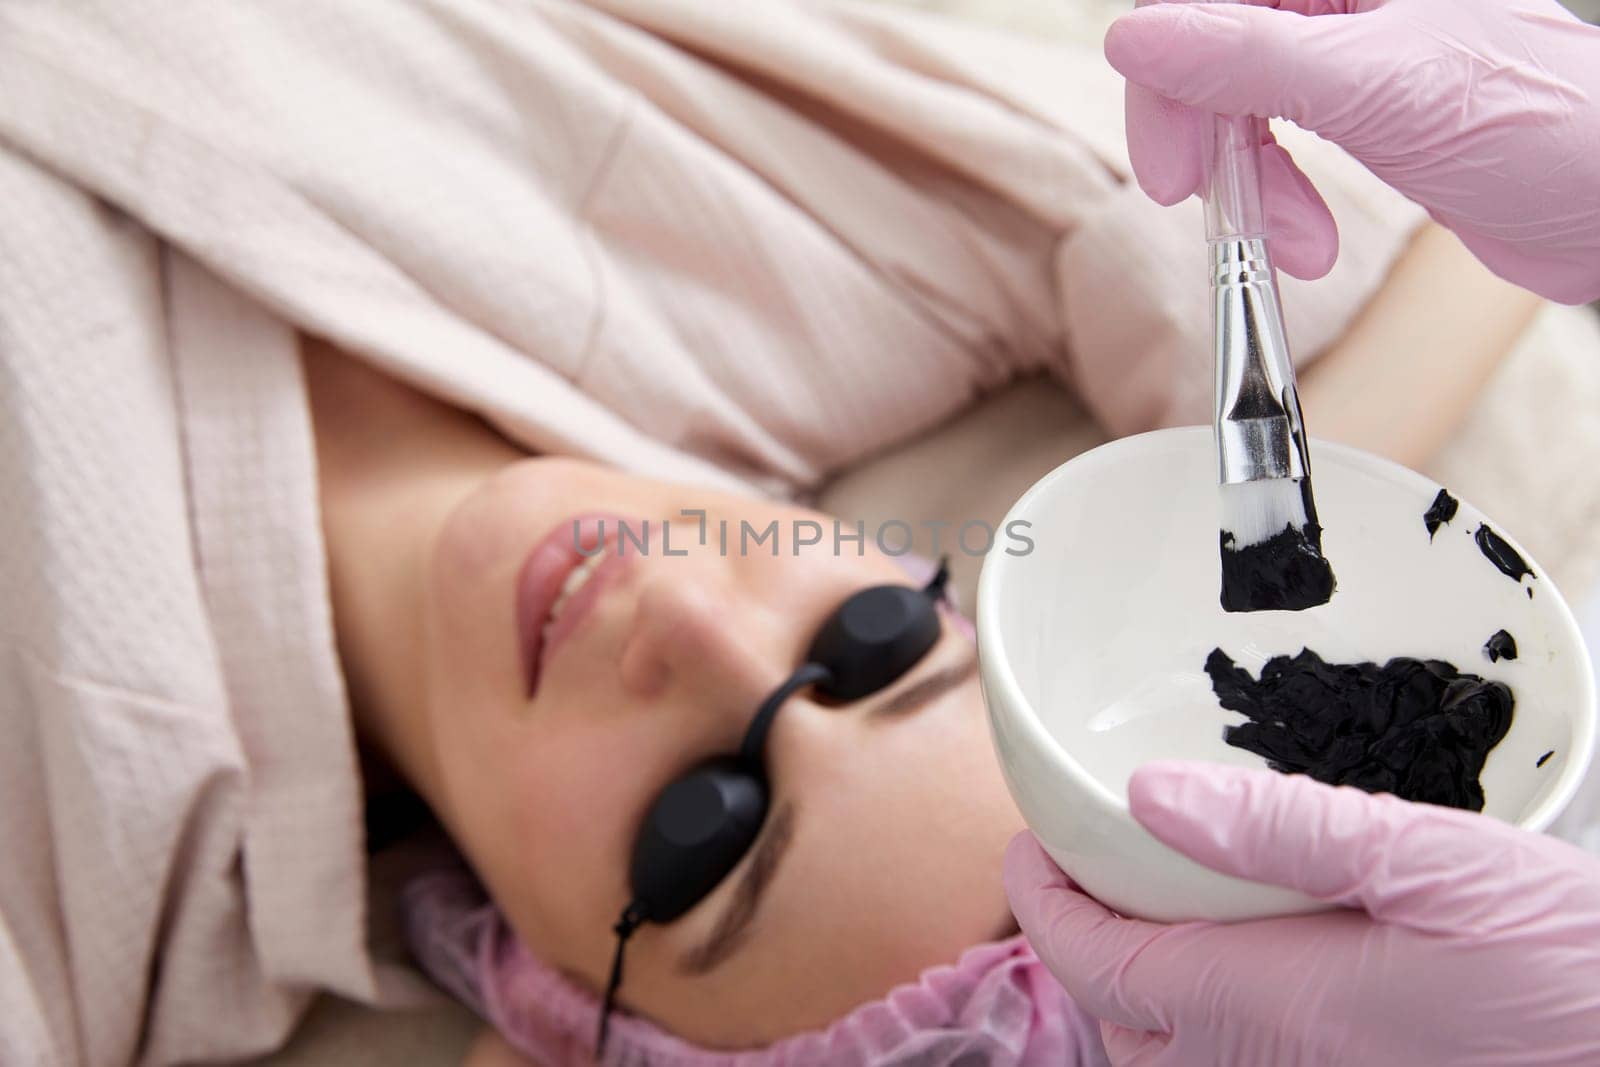 Carbon peeling in beauty salon. Cosmetologist applying black mask on the face of beautiful woman for carbon peeling